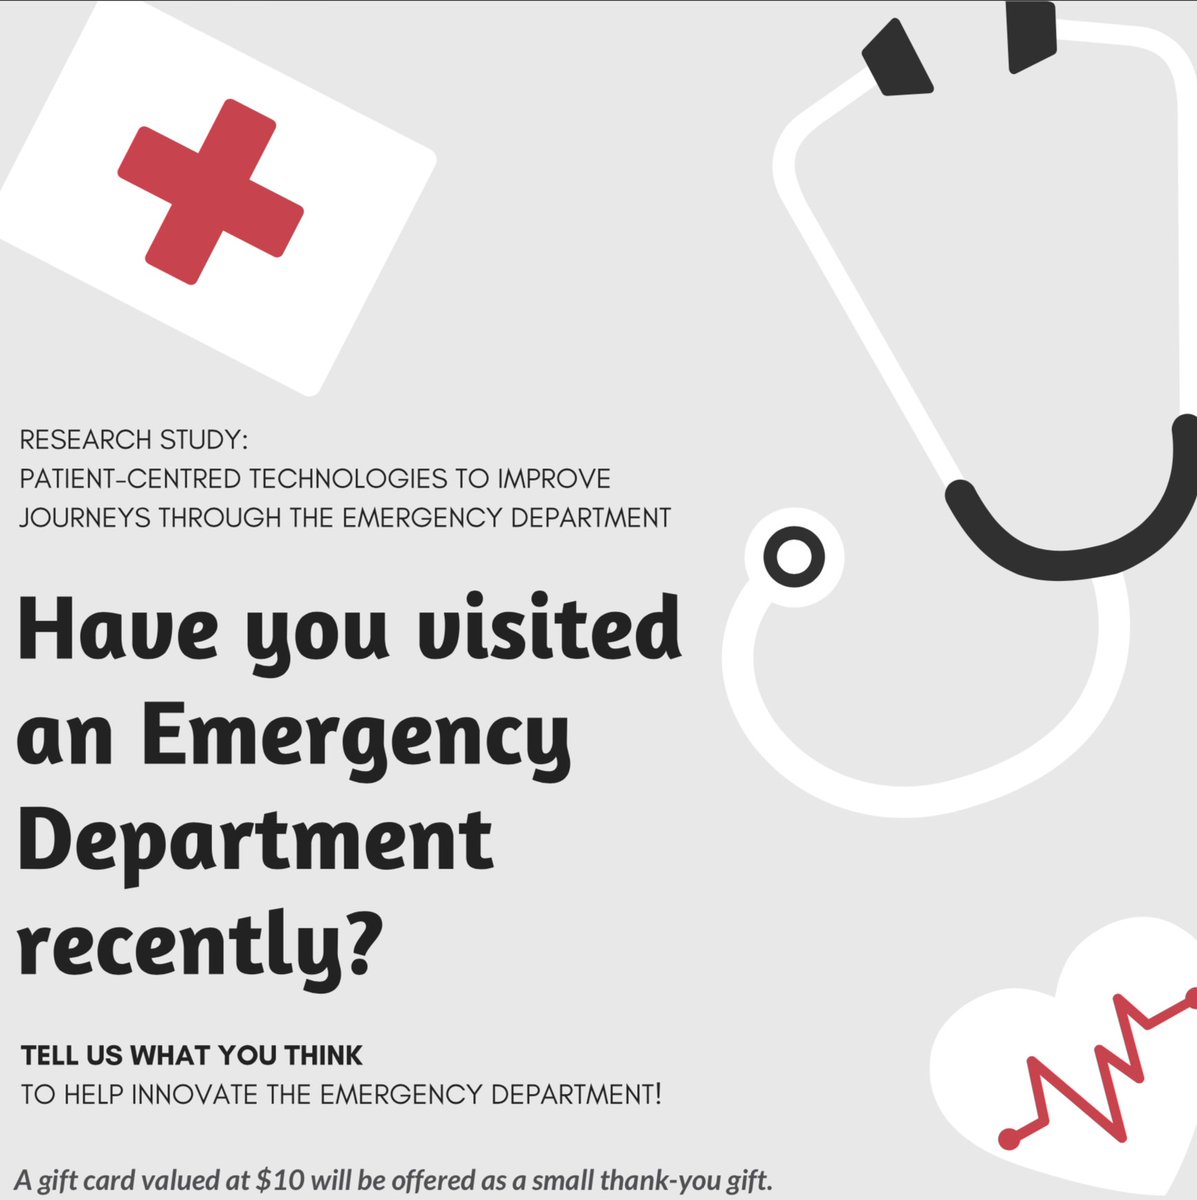 UBC digem on X: If you are over 19 years old and had a recent visit to an  emergency department, we invite you to participate in a research study that  aims to help patients using health technology! Feel free to contact us at  nooshin.jafari@ubc.ca or 604-822